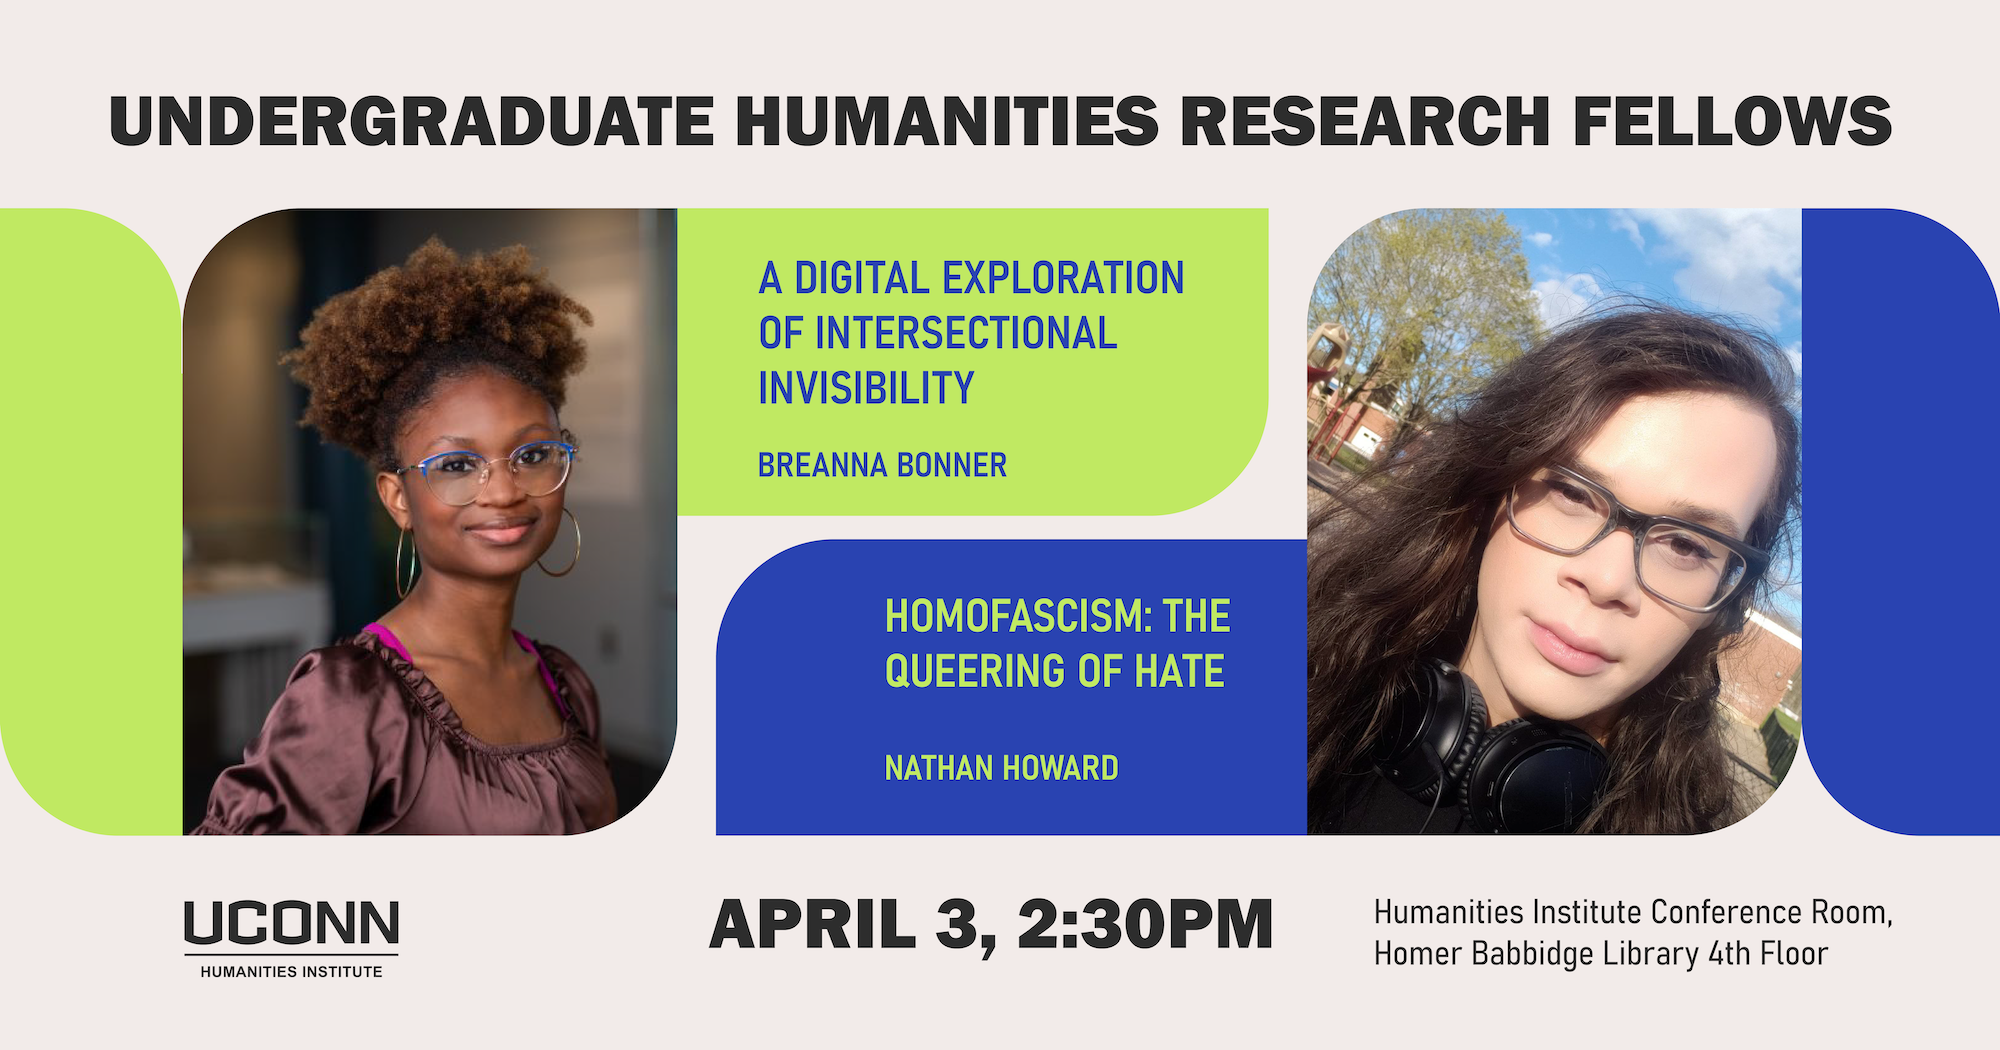 Undergraduate Humanities Research Fellows. Breanna Bonner, “The Space Between Black and Liberation: A Digital Exploration of Intersectional Invisibility" and Nathan Howard, "Homofascism: The Queering of Hate." April 3, 2:30pm. Humanities Institute Conference Room, Homer Babbidge Library, 4th floor.